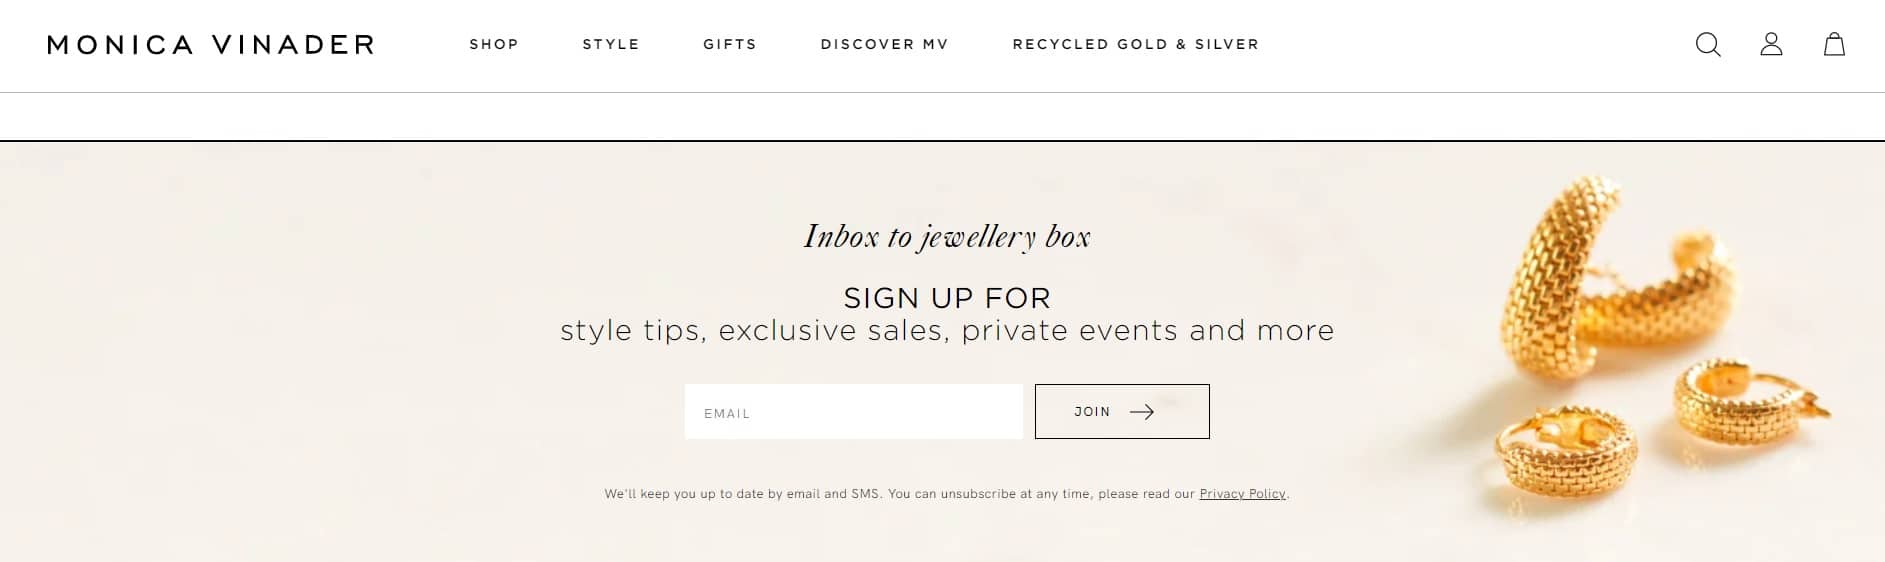 retail email signup form example